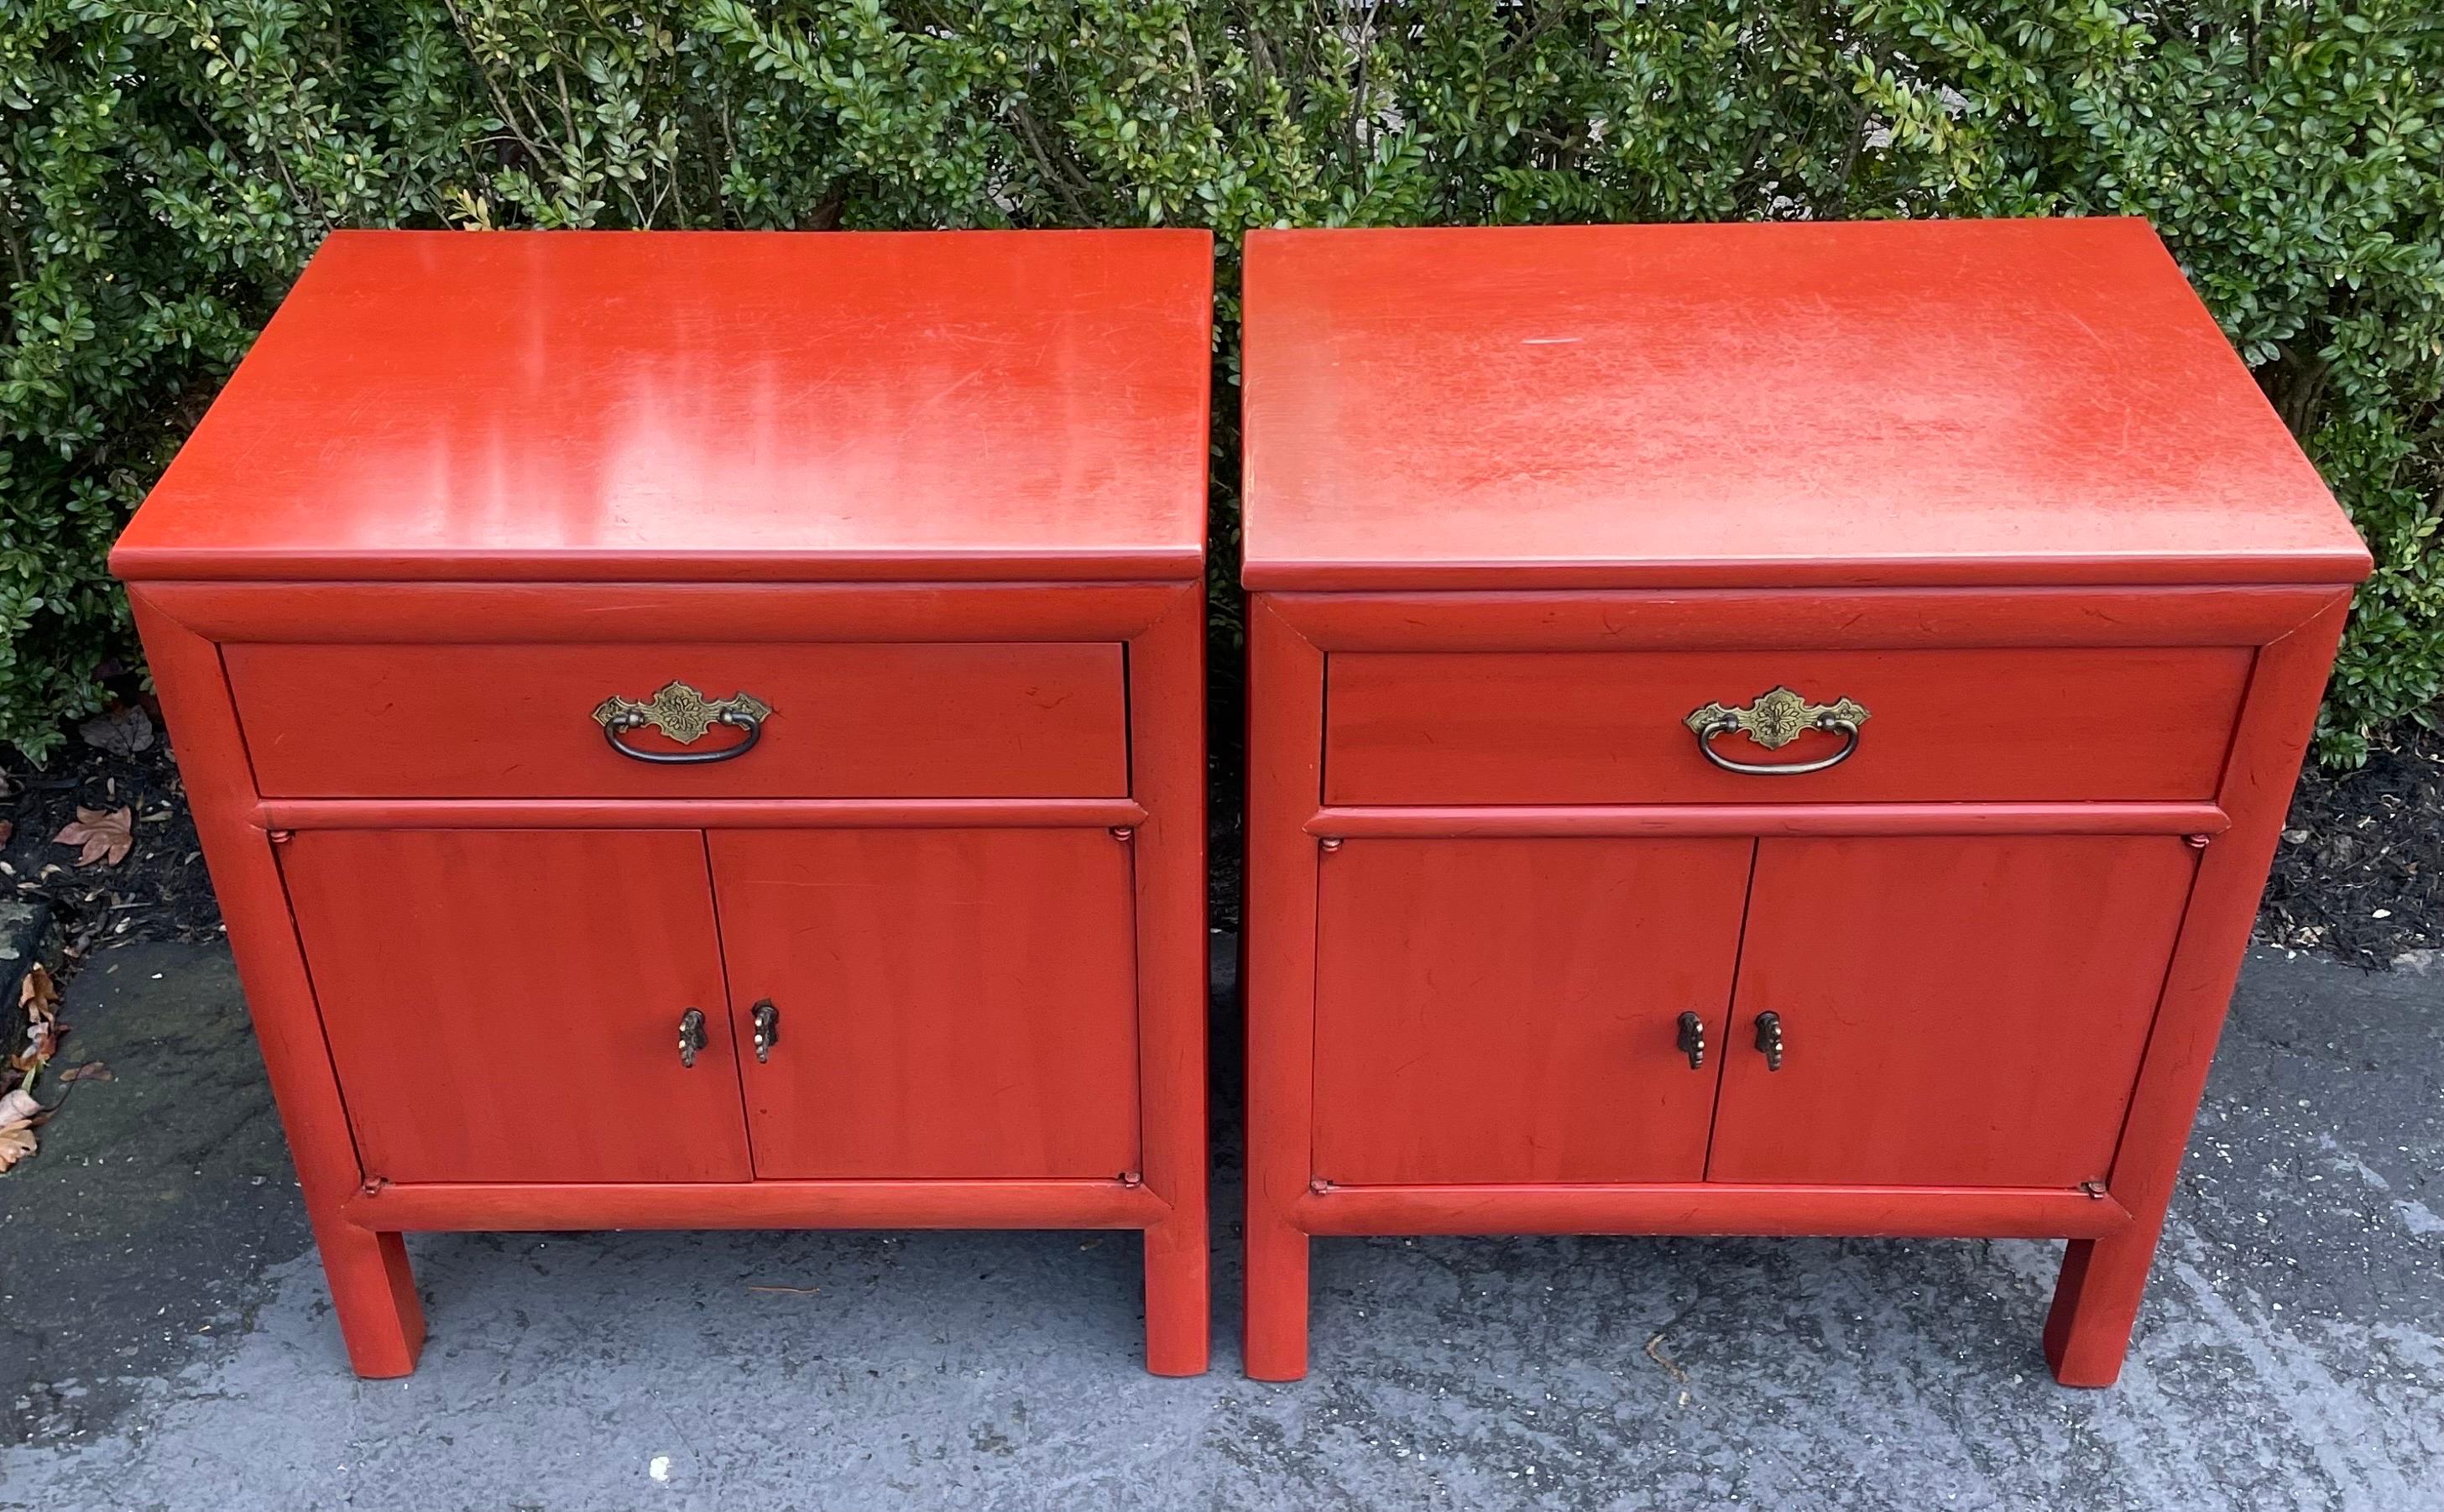 Very cool Hollywood Regency Asian inspired side tables or nightstands by Century Furniture.  Paprika color with great patina and age.